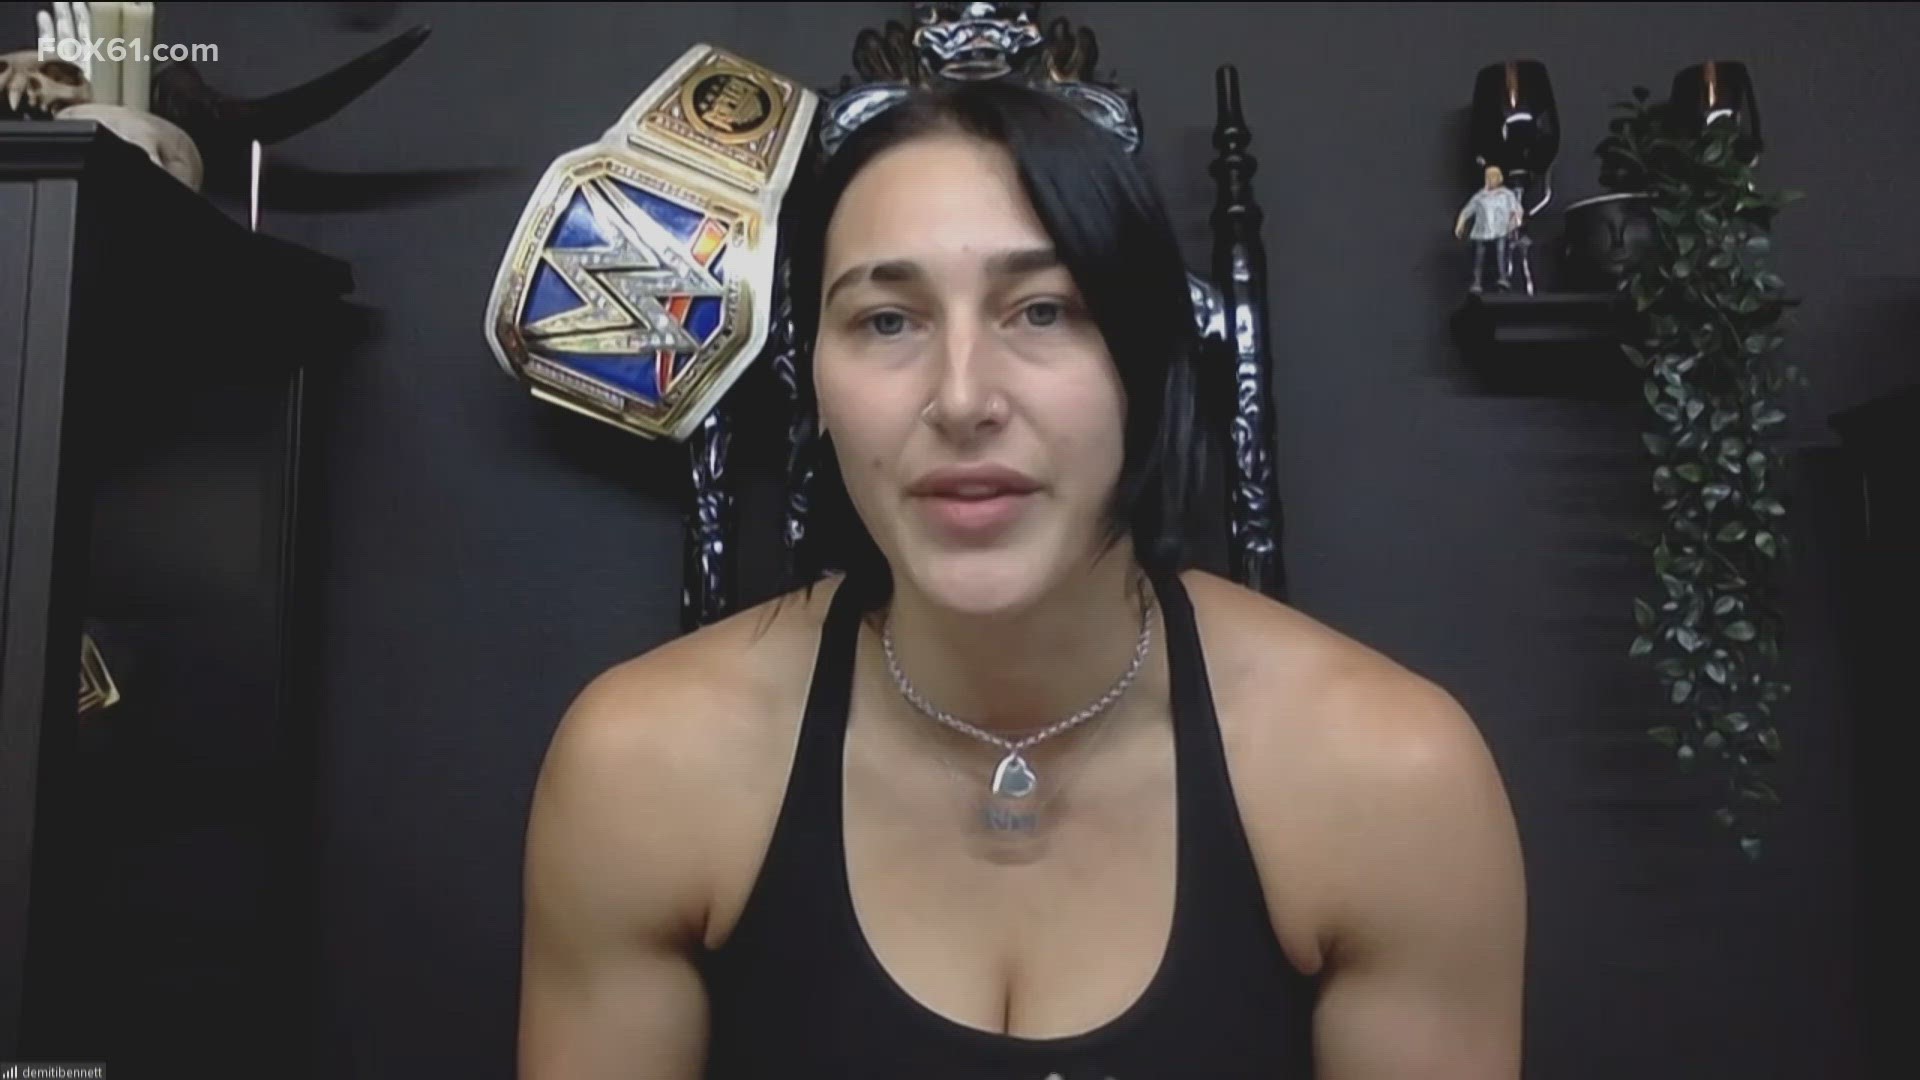 WWE Superstar Rhea Ripley is new to Monday Night Raw, but is raring to go into the ring.